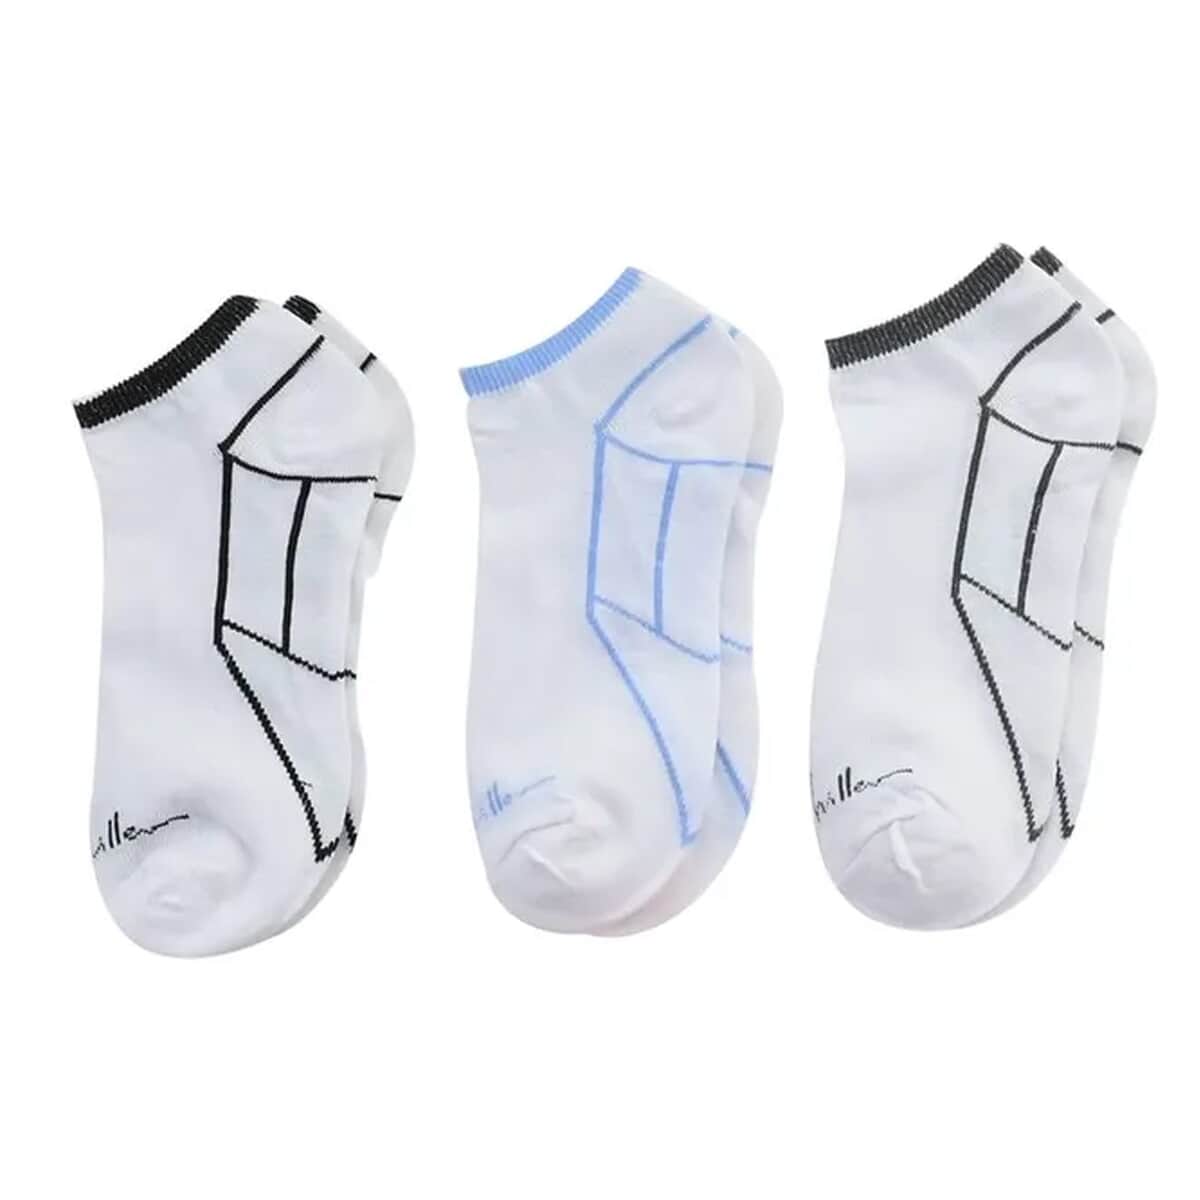 TLV Nicole Miller 10 Pairs No Show Socks (Sizes 4-10) - White/Multi (Ships in 8-10 business days) image number 4